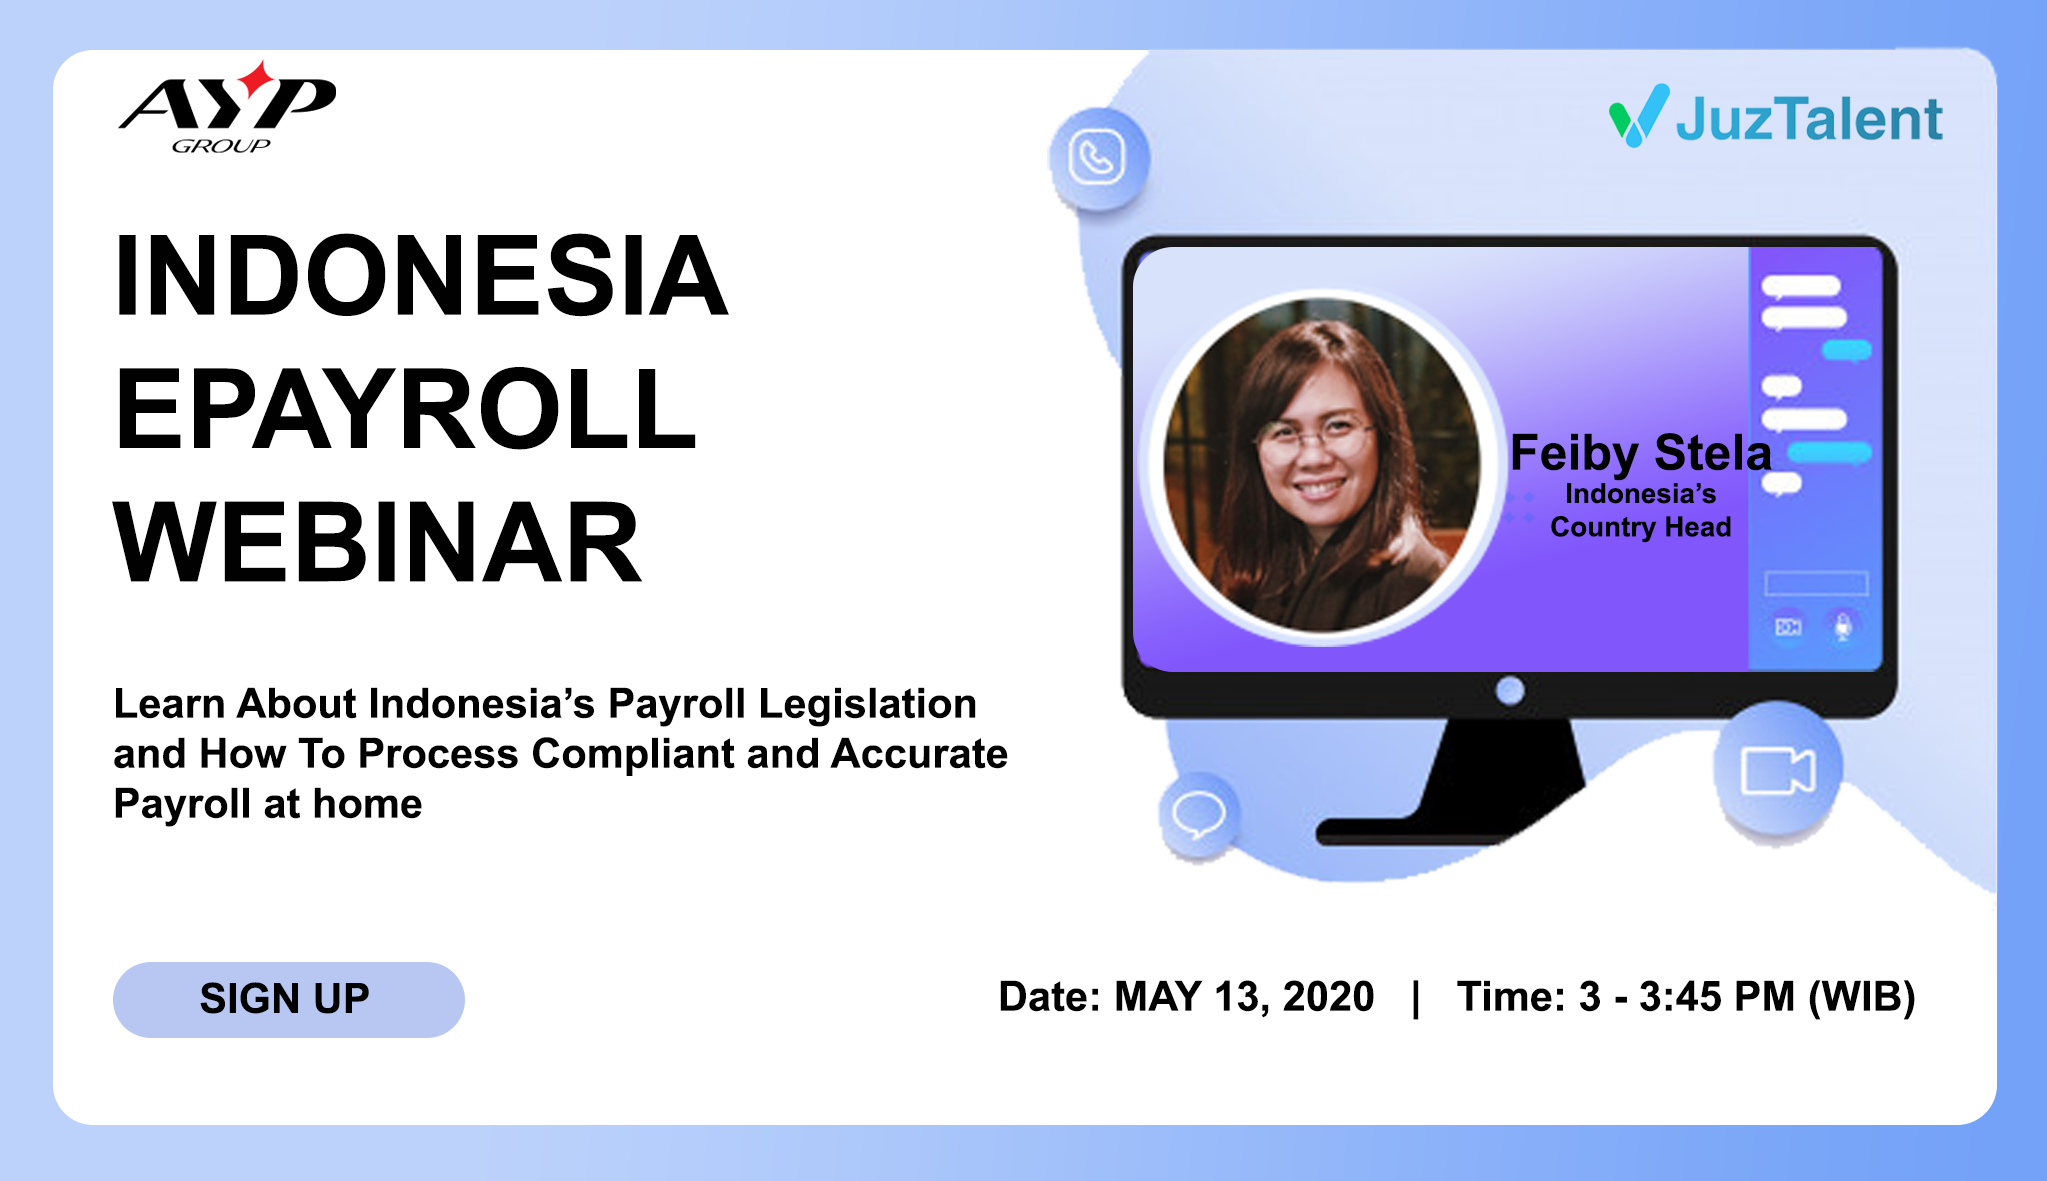 Payroll Journey - The Indonesia's style